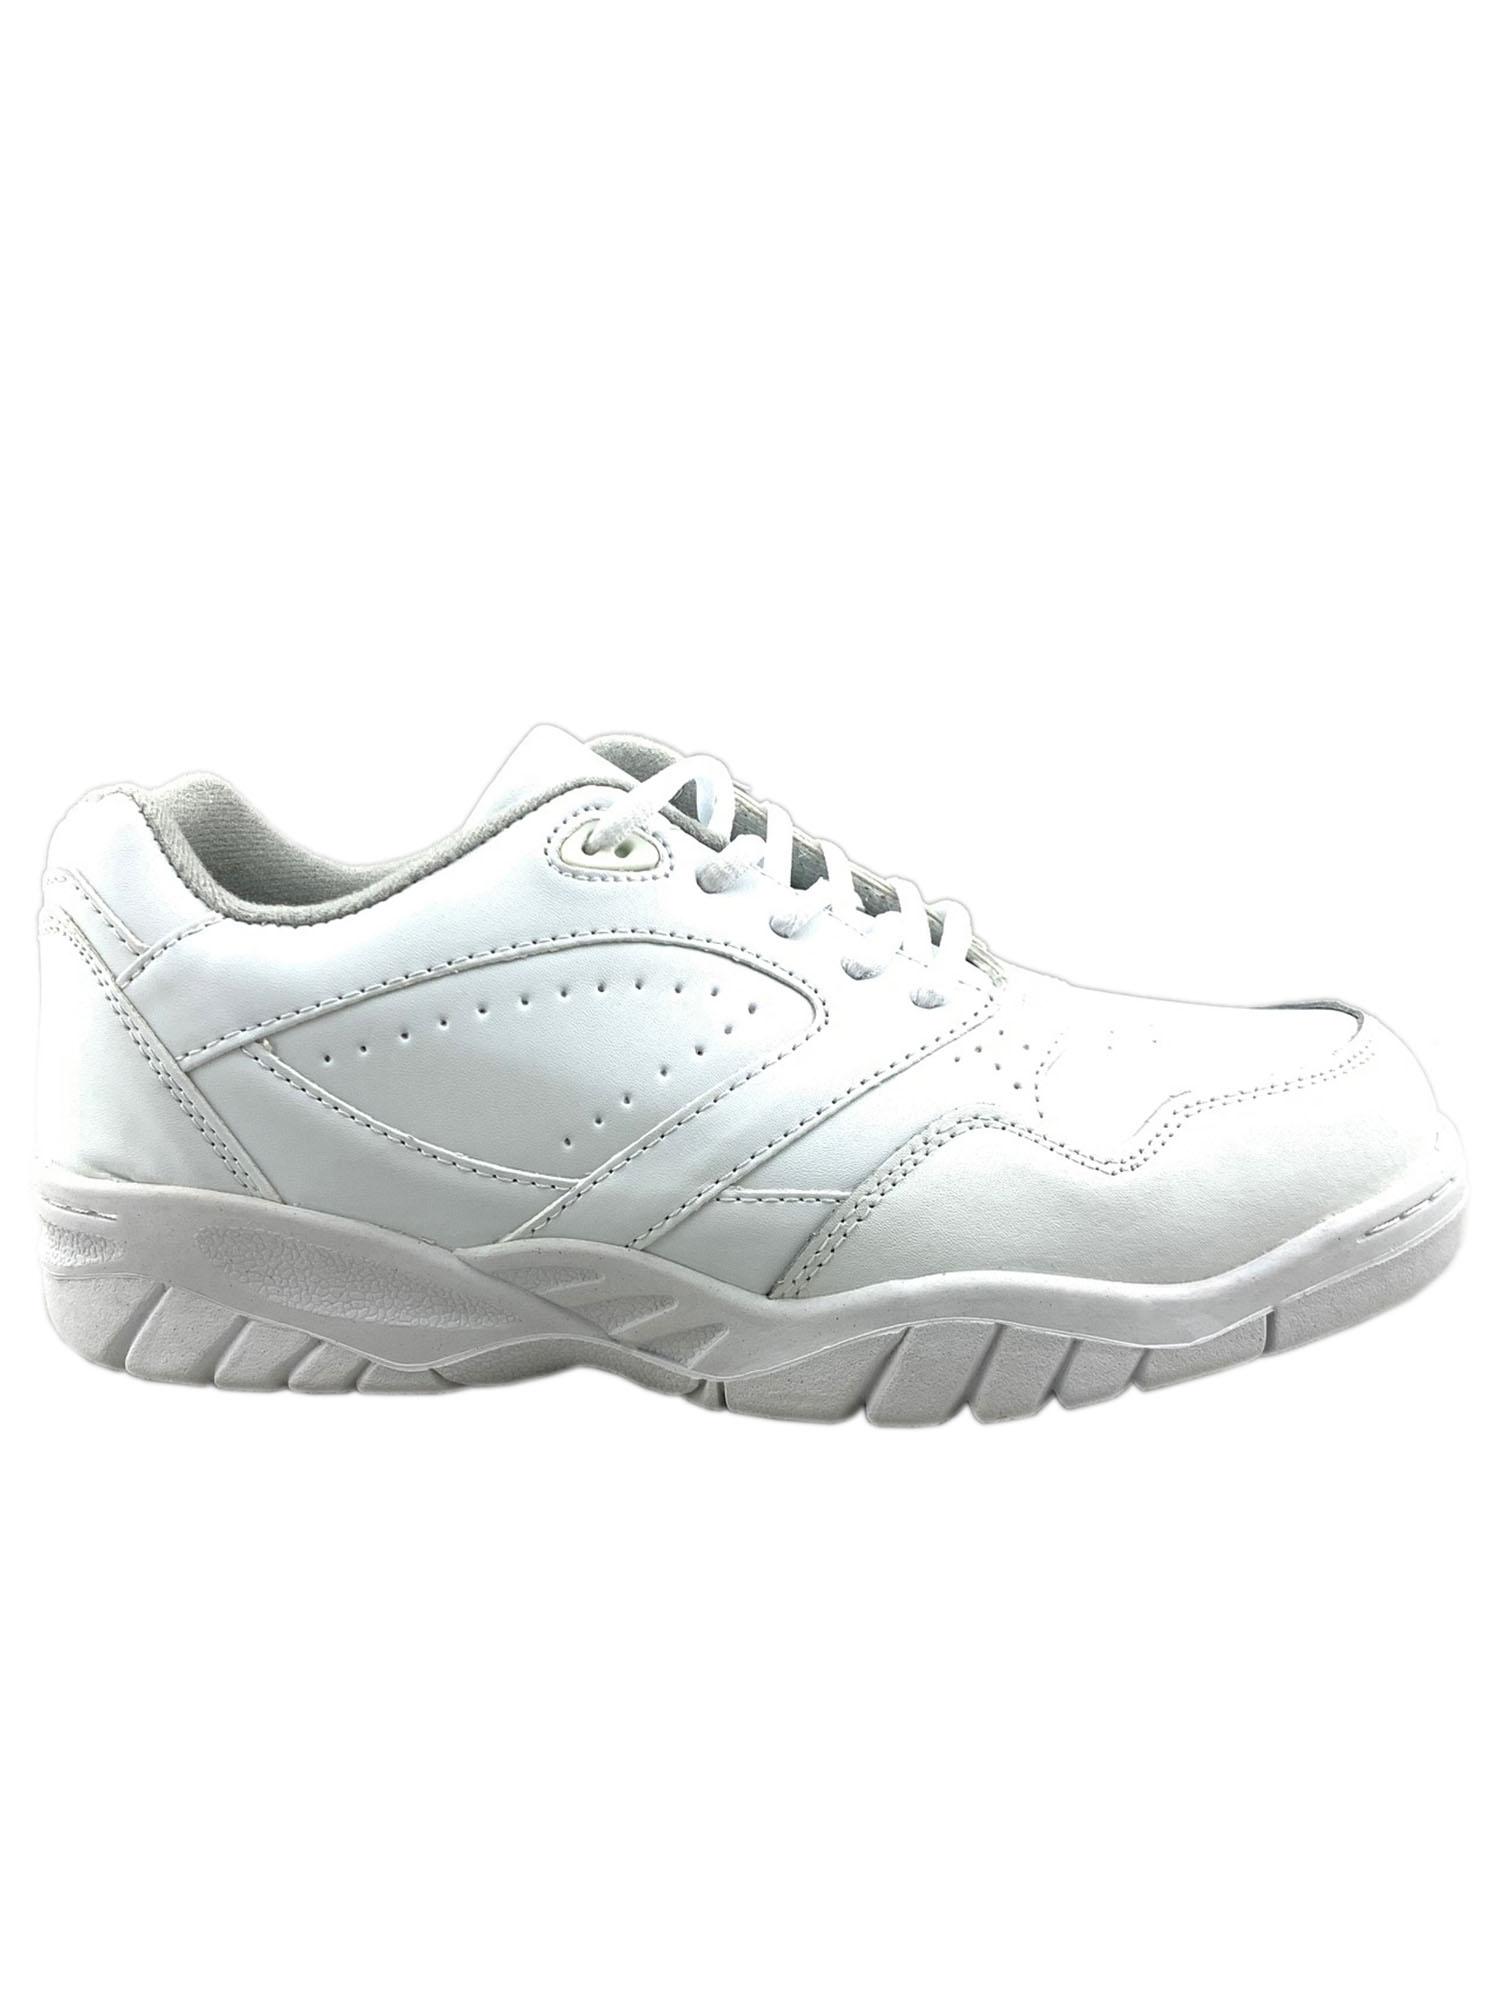 Tanleewa Men's Leather White Sports Shoes Lightweight Sneakers Breathable Casual Shoe Size 17 - image 1 of 5